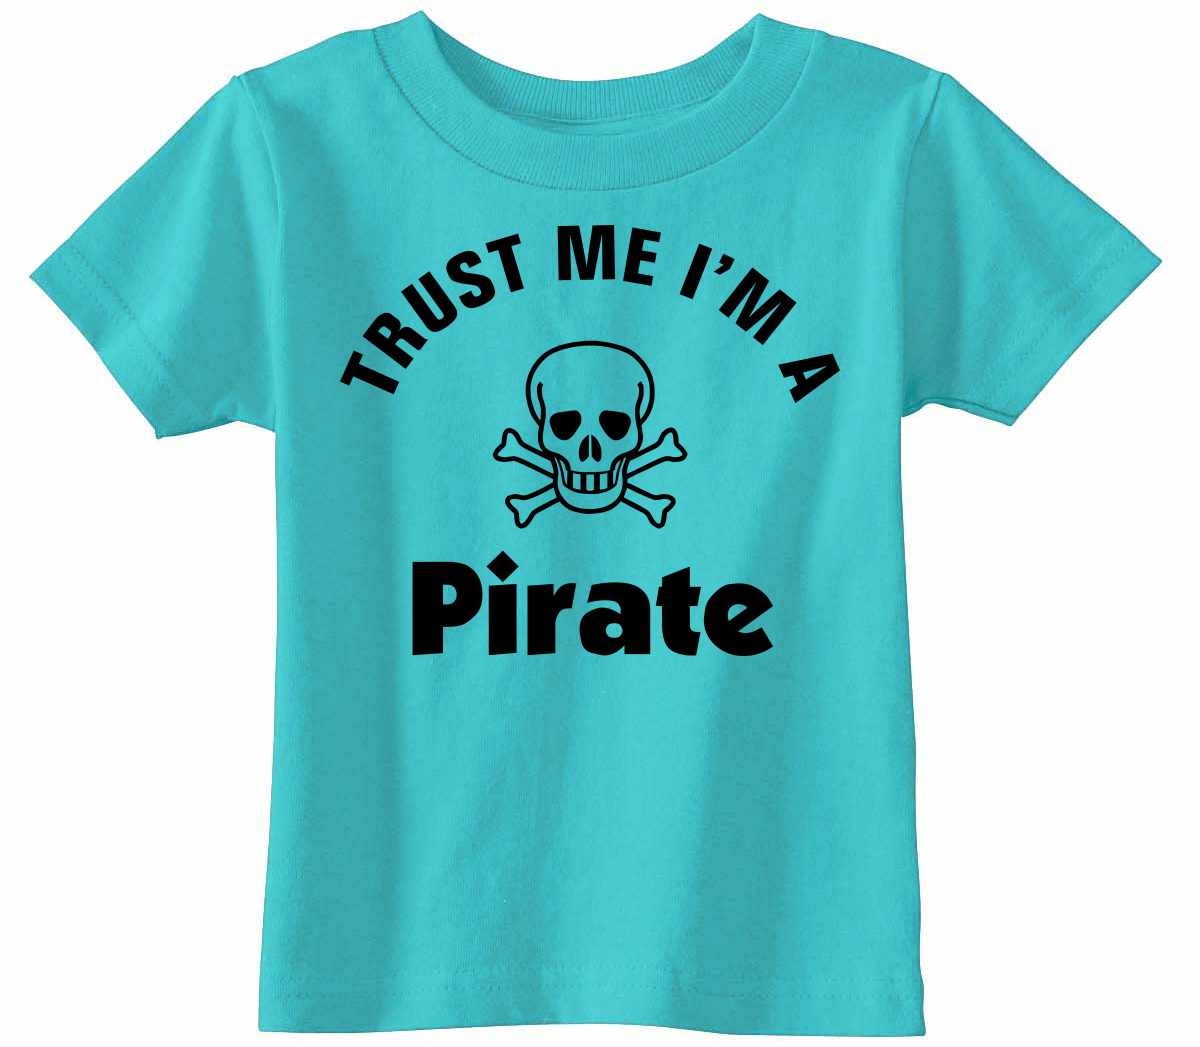 Trust Me I'm a Pirate Infant/Toddler  (#808-7)